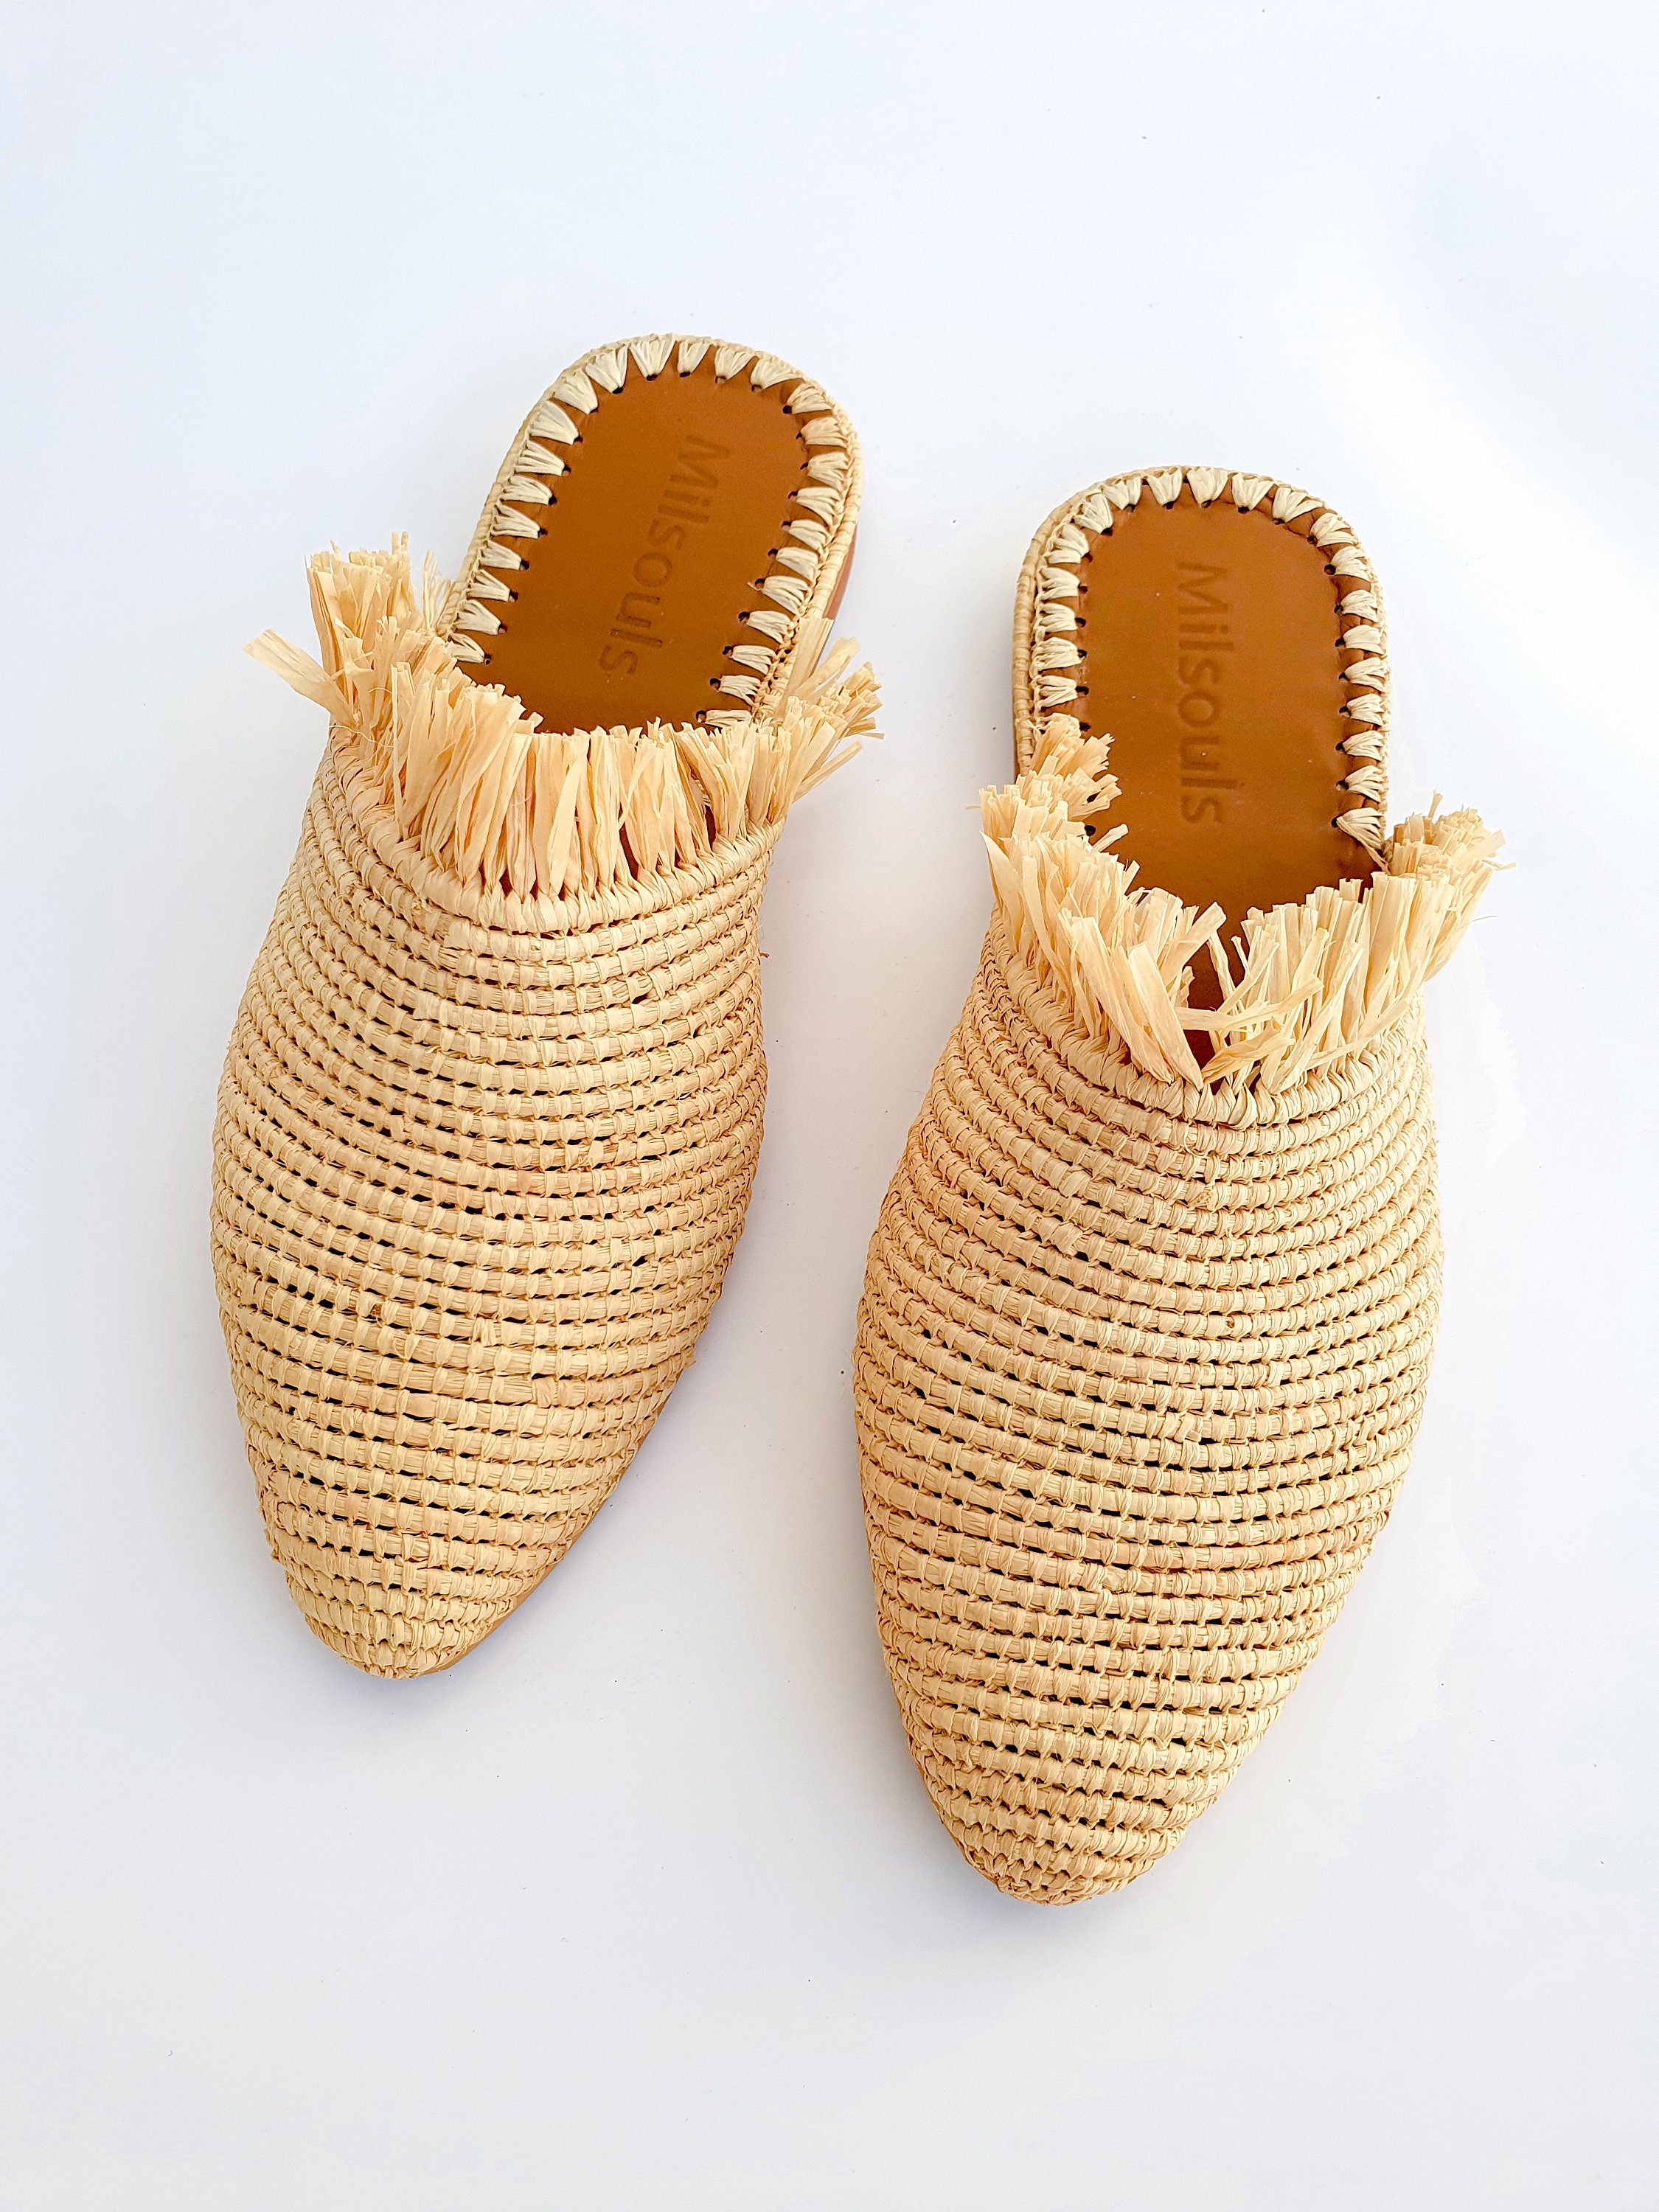 Raffia Shoes Handmade Slippers Summer Mules Moroccan Shoes - Etsy